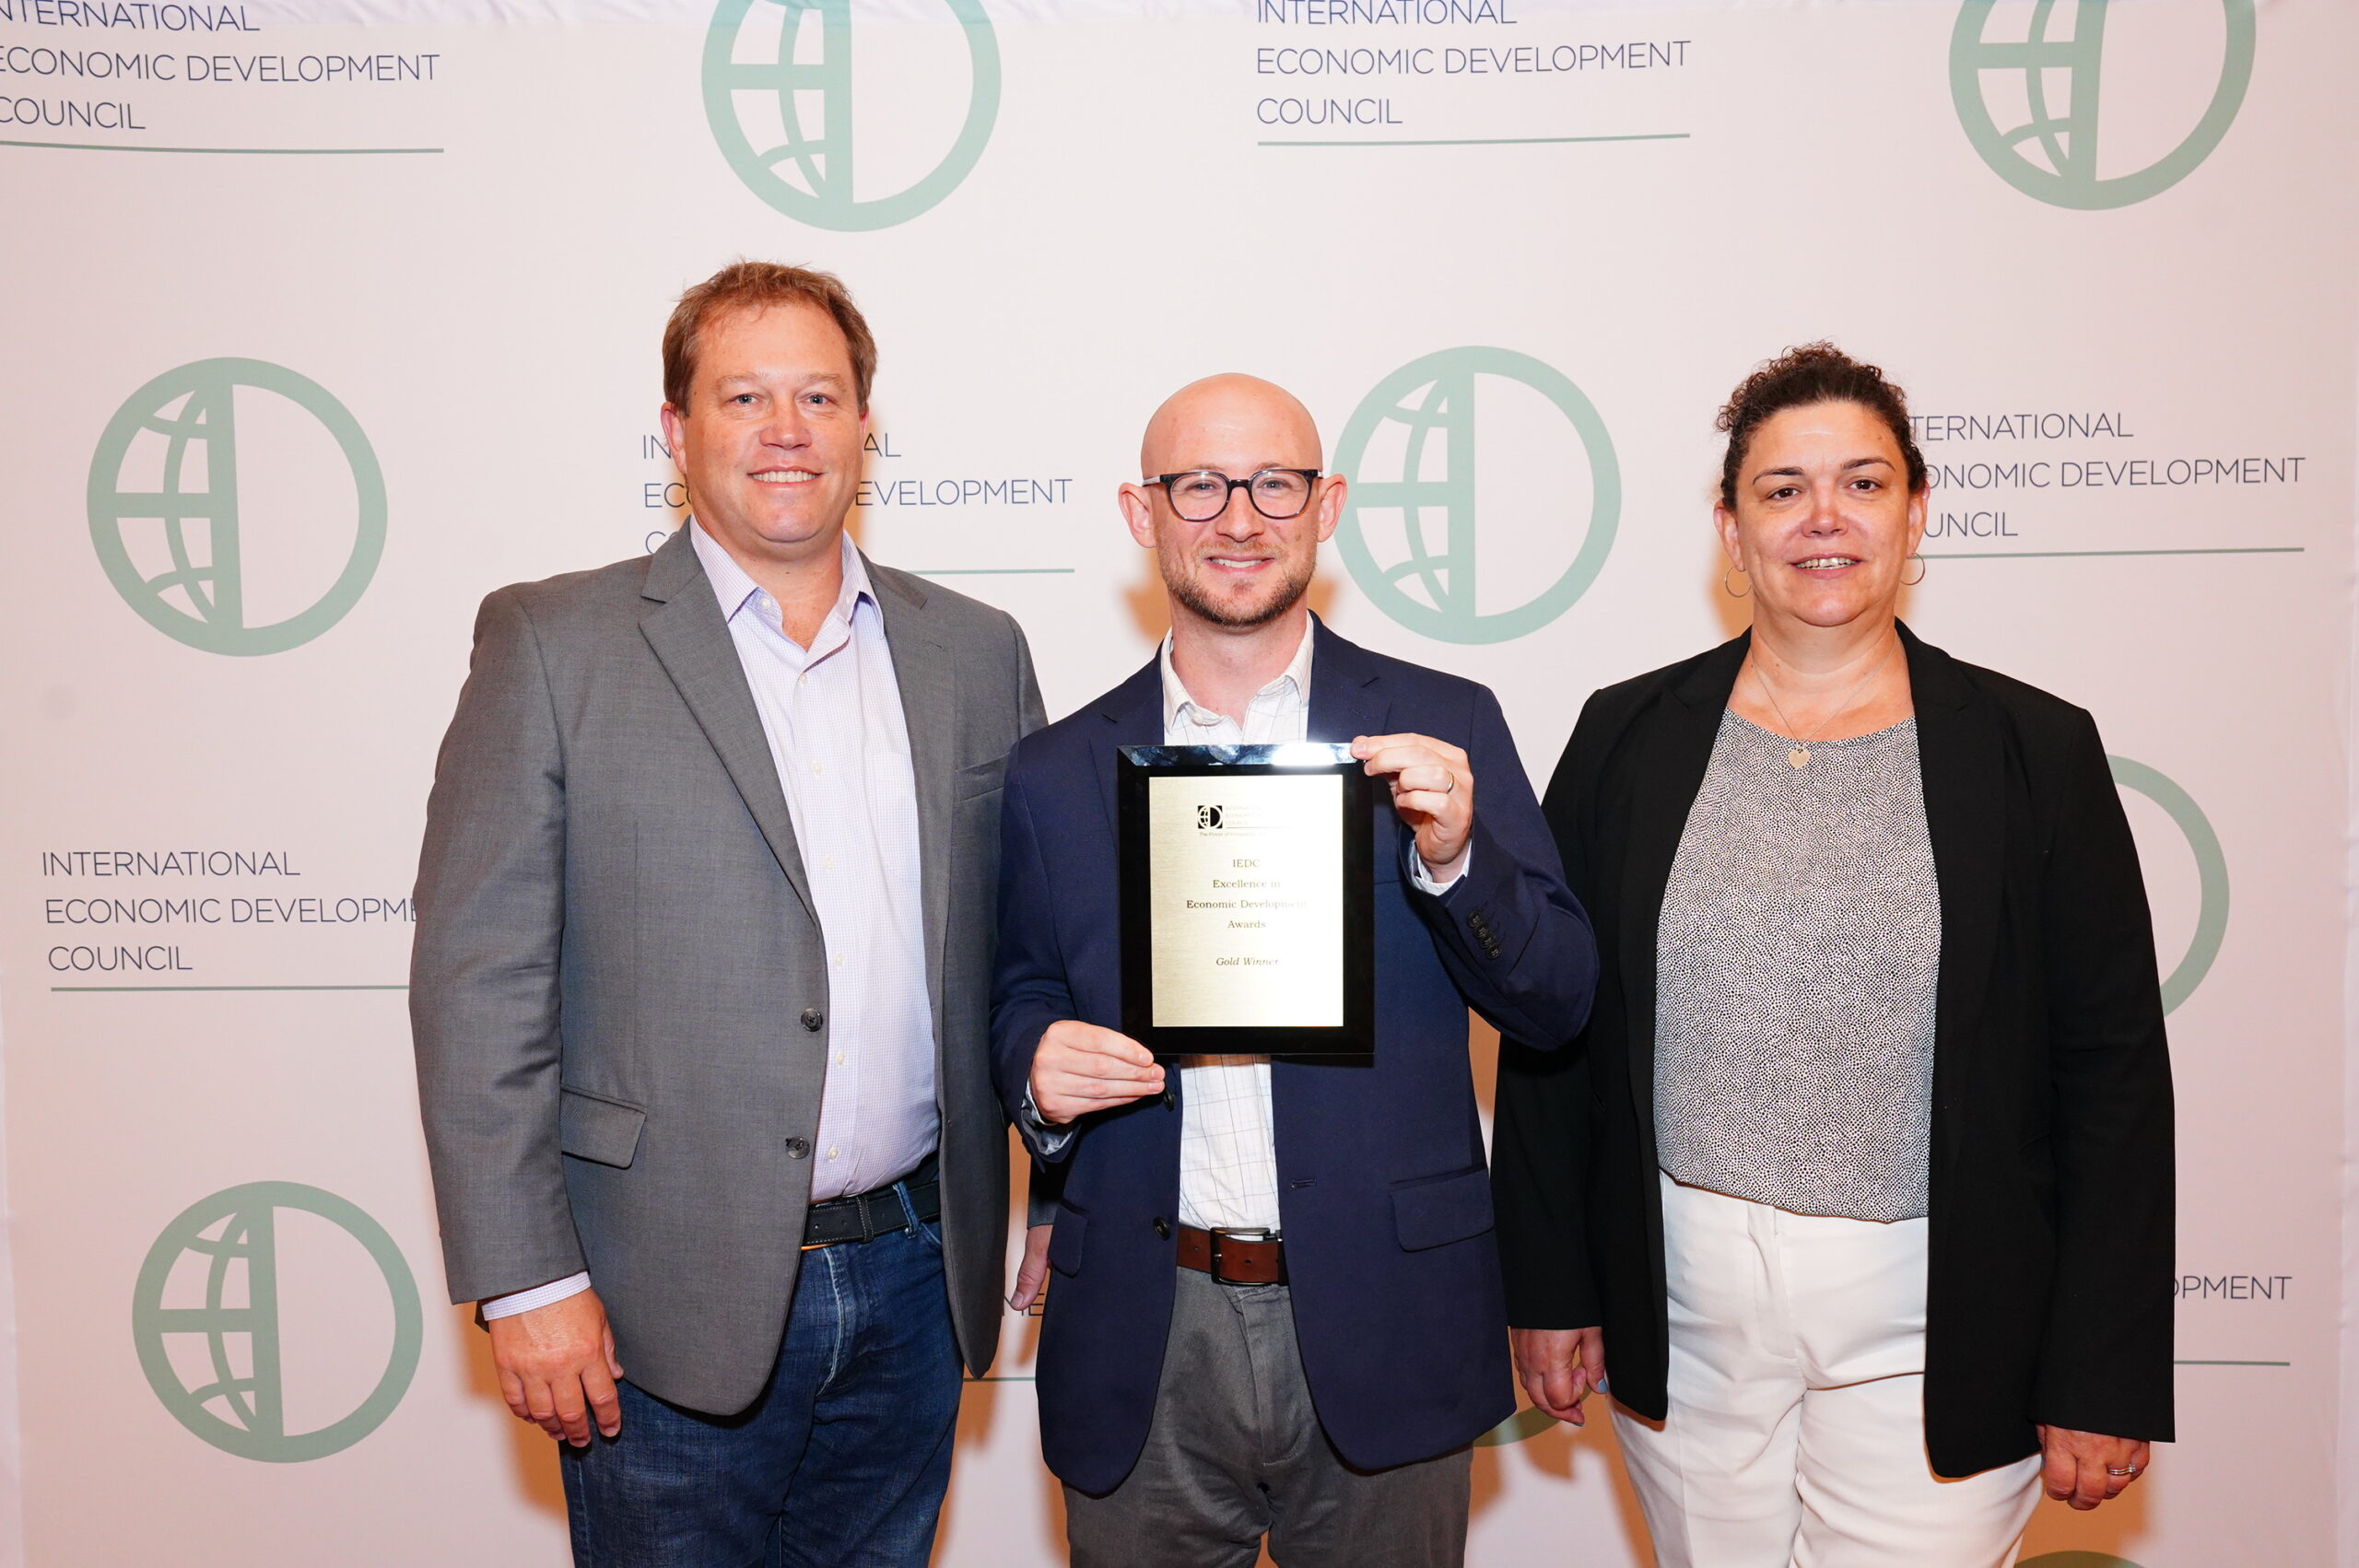 BDCC’s Welcoming Workplaces Wins Gold “Excellence In Economic Development” Award From International Economic Development Council